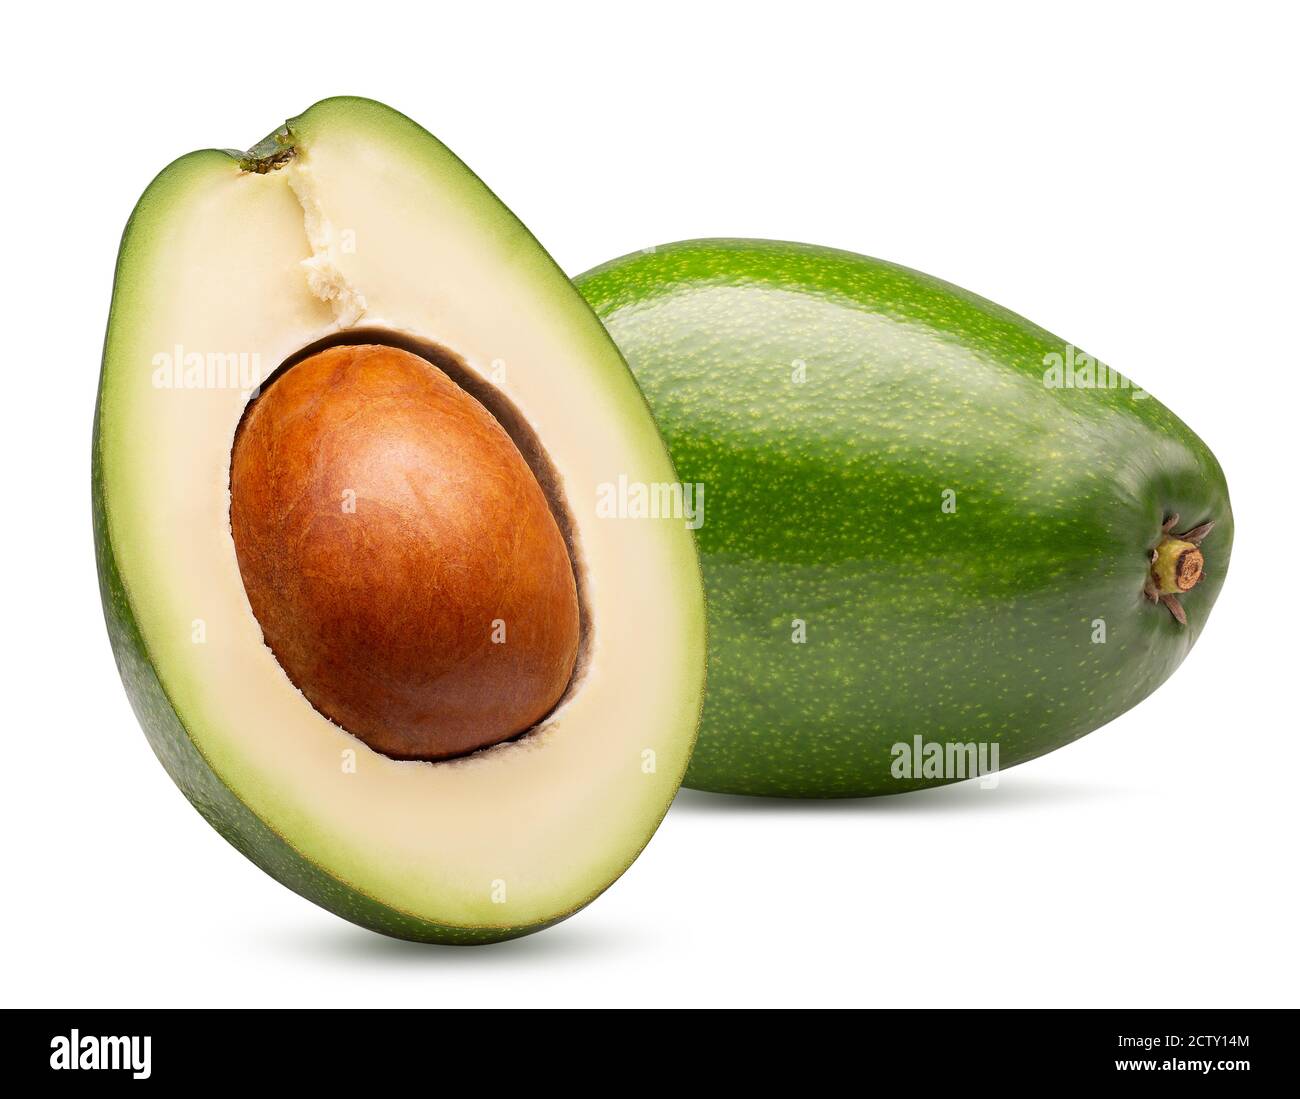 two halves of avocado isolated on a white background. Stock Photo